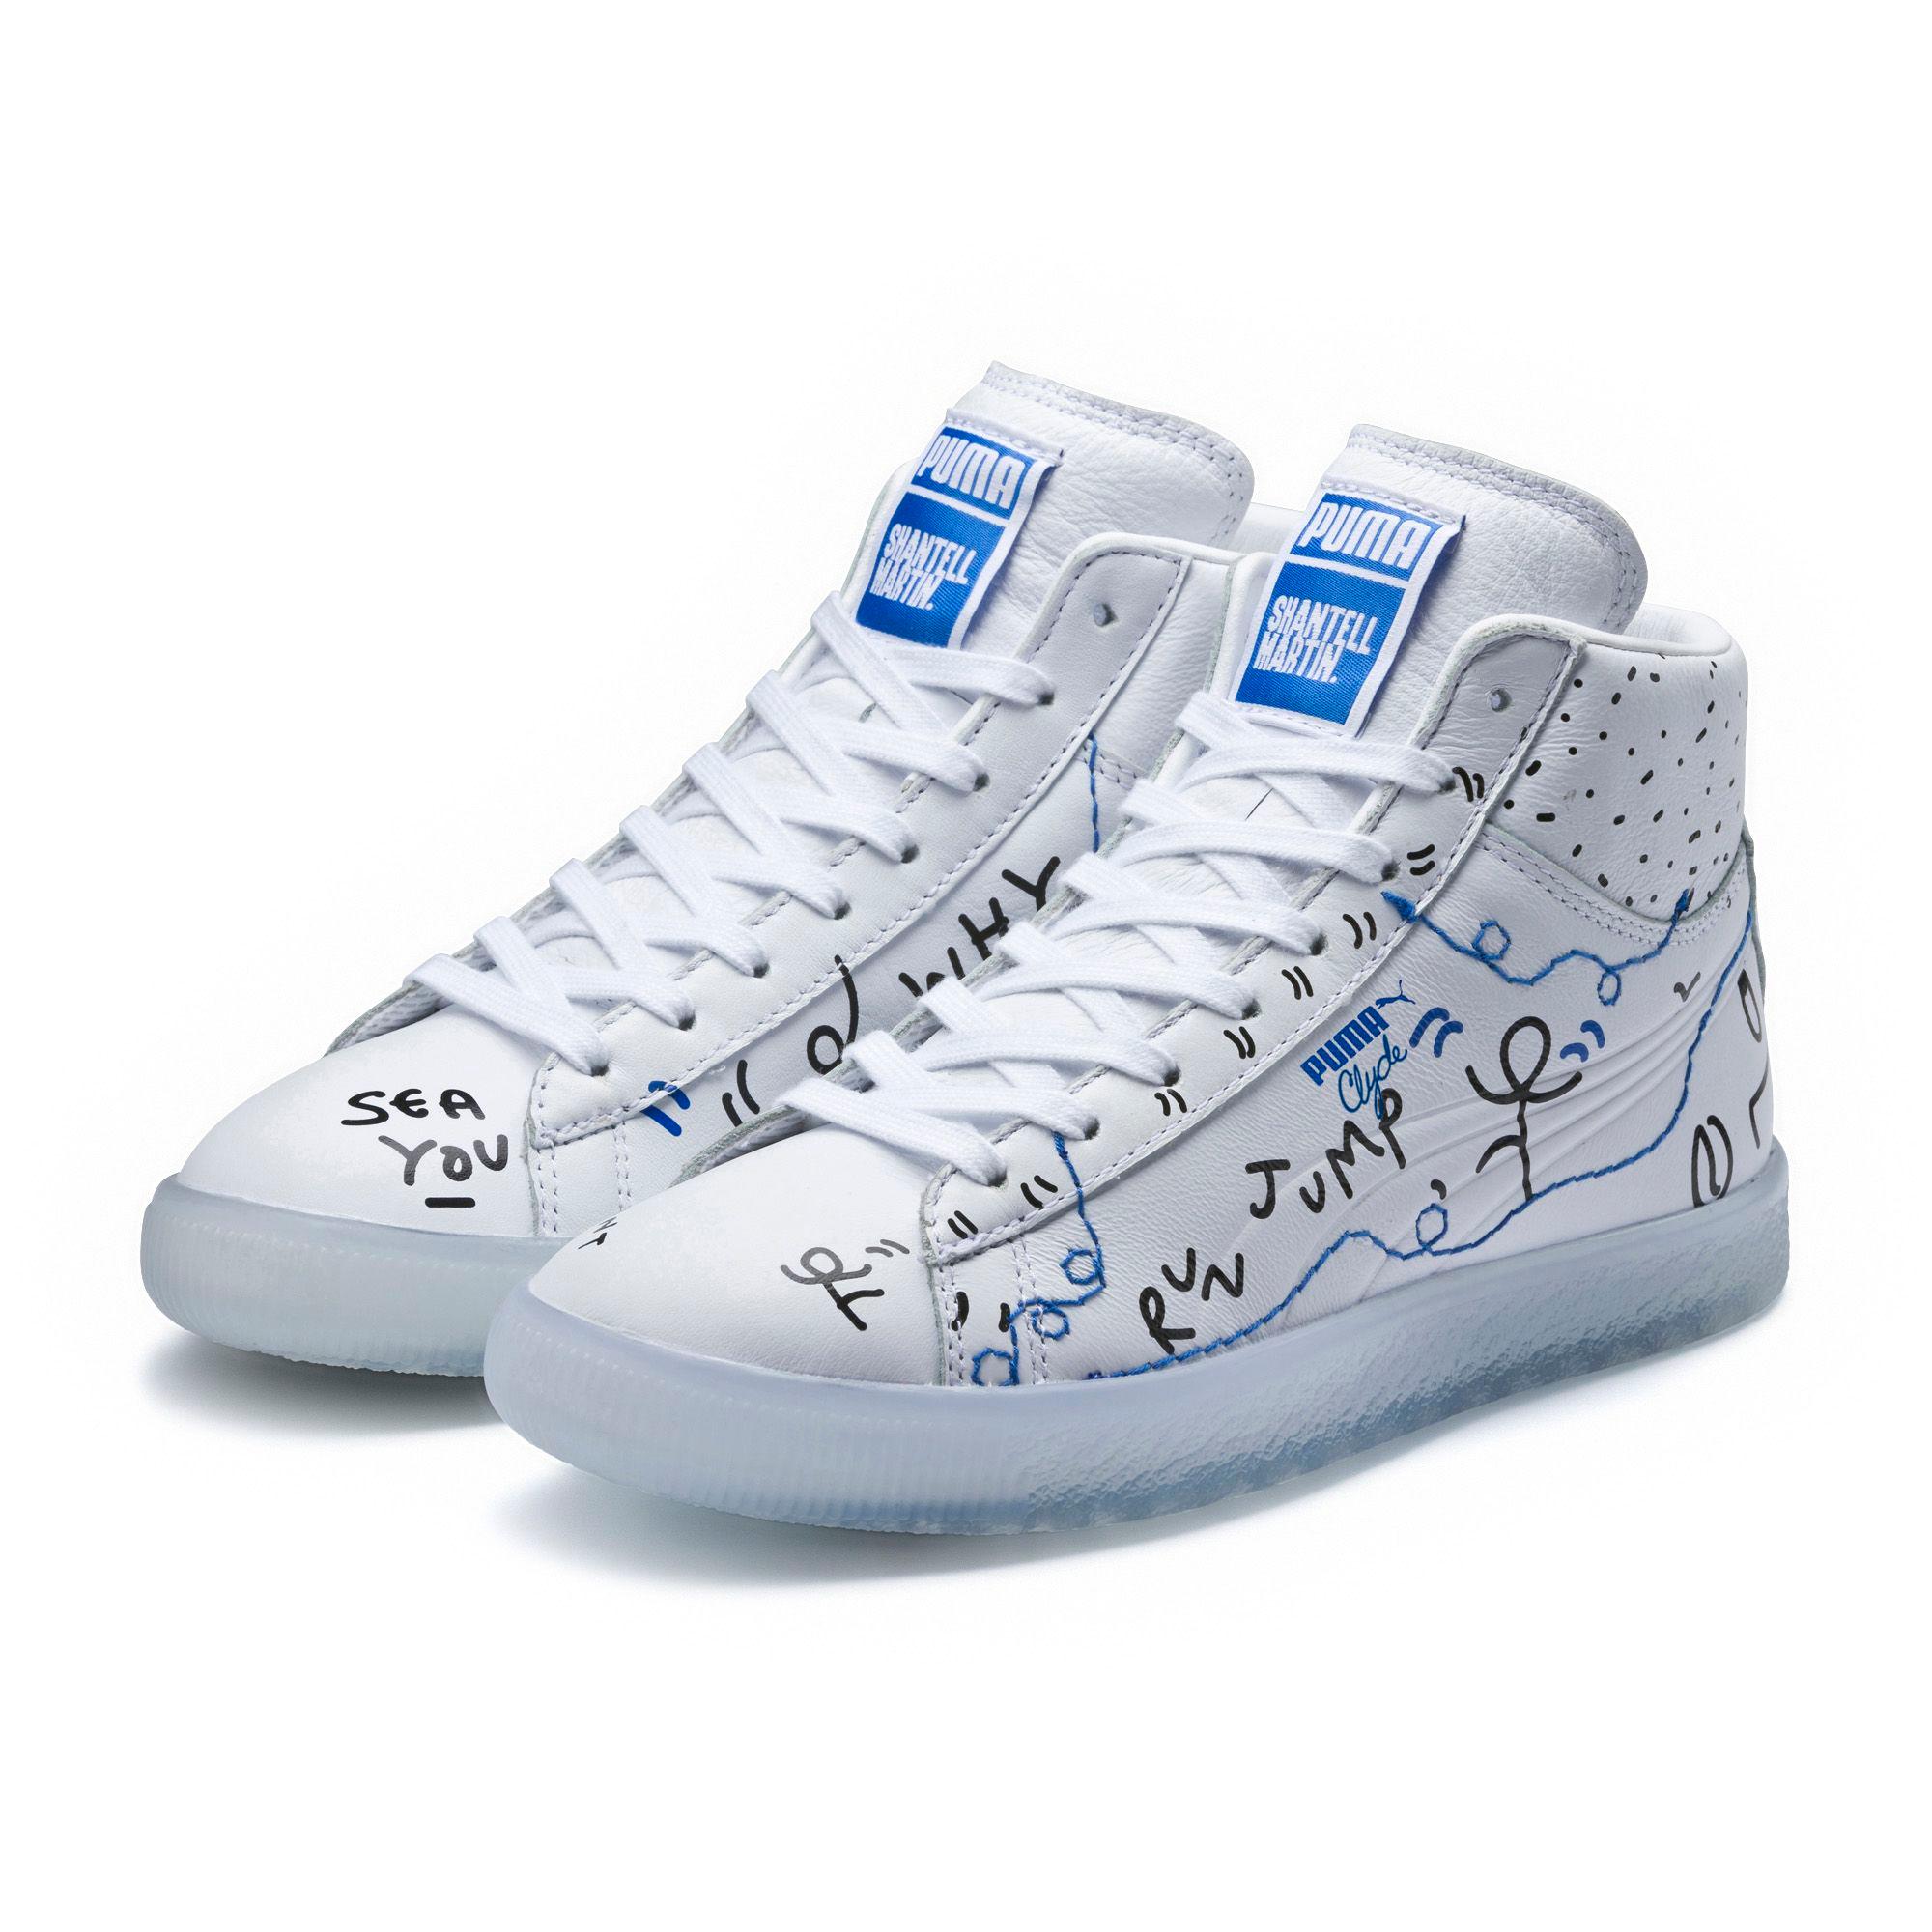 Puma X Shantell Martin Clyde Mid Sneakers | LookMazing